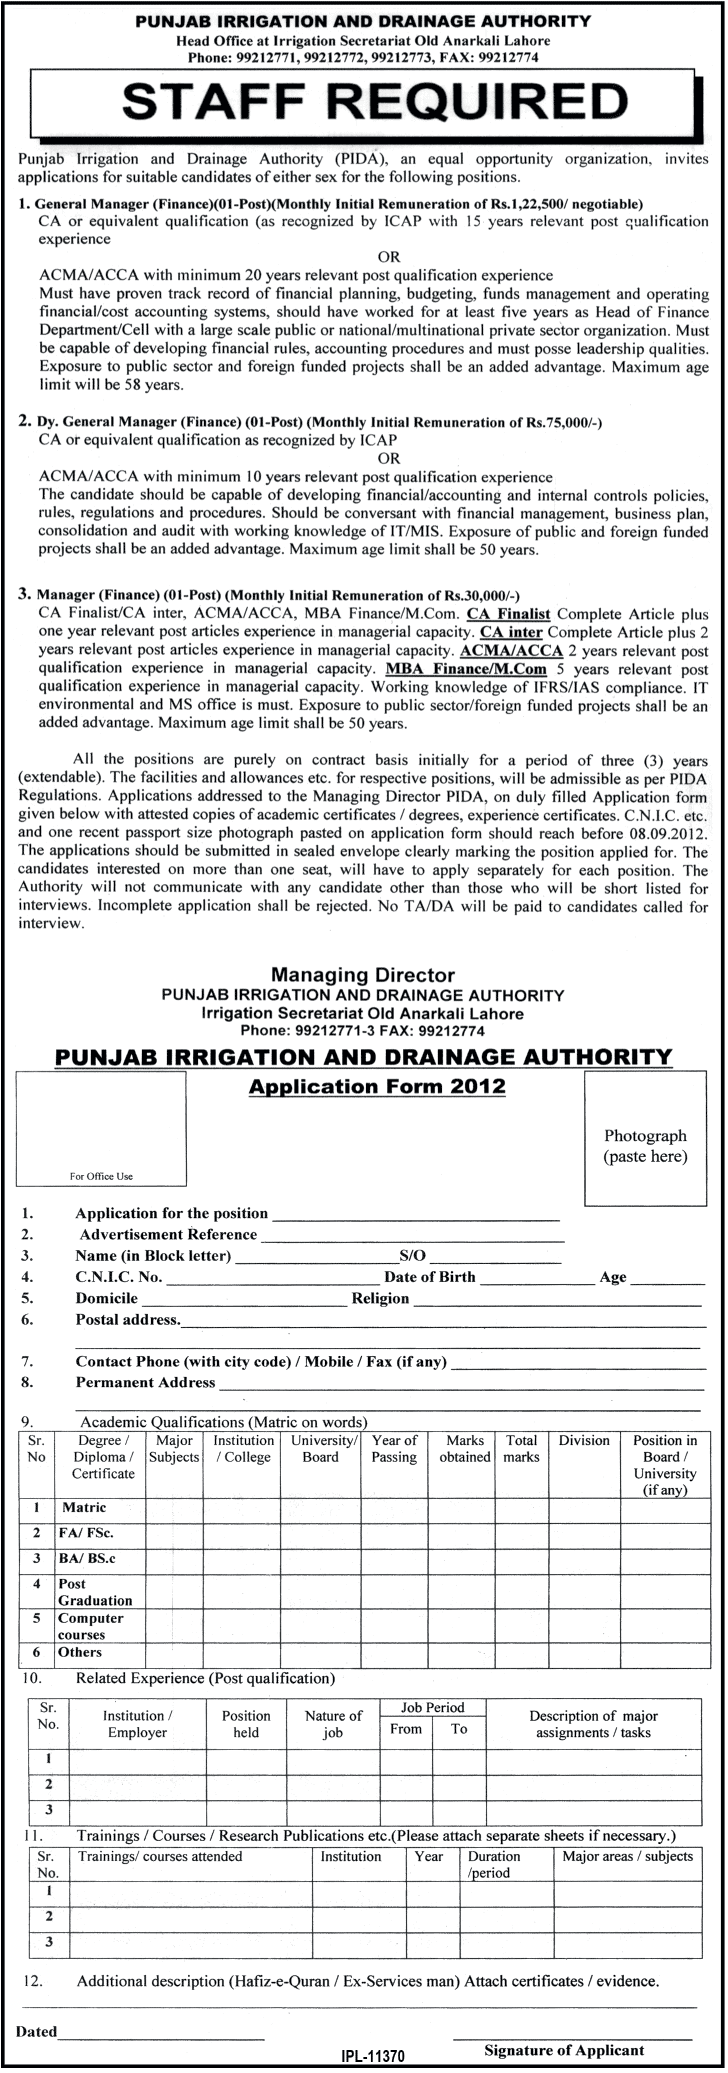 punjab irrigation and drainage department jobs 2012 23 August 2012